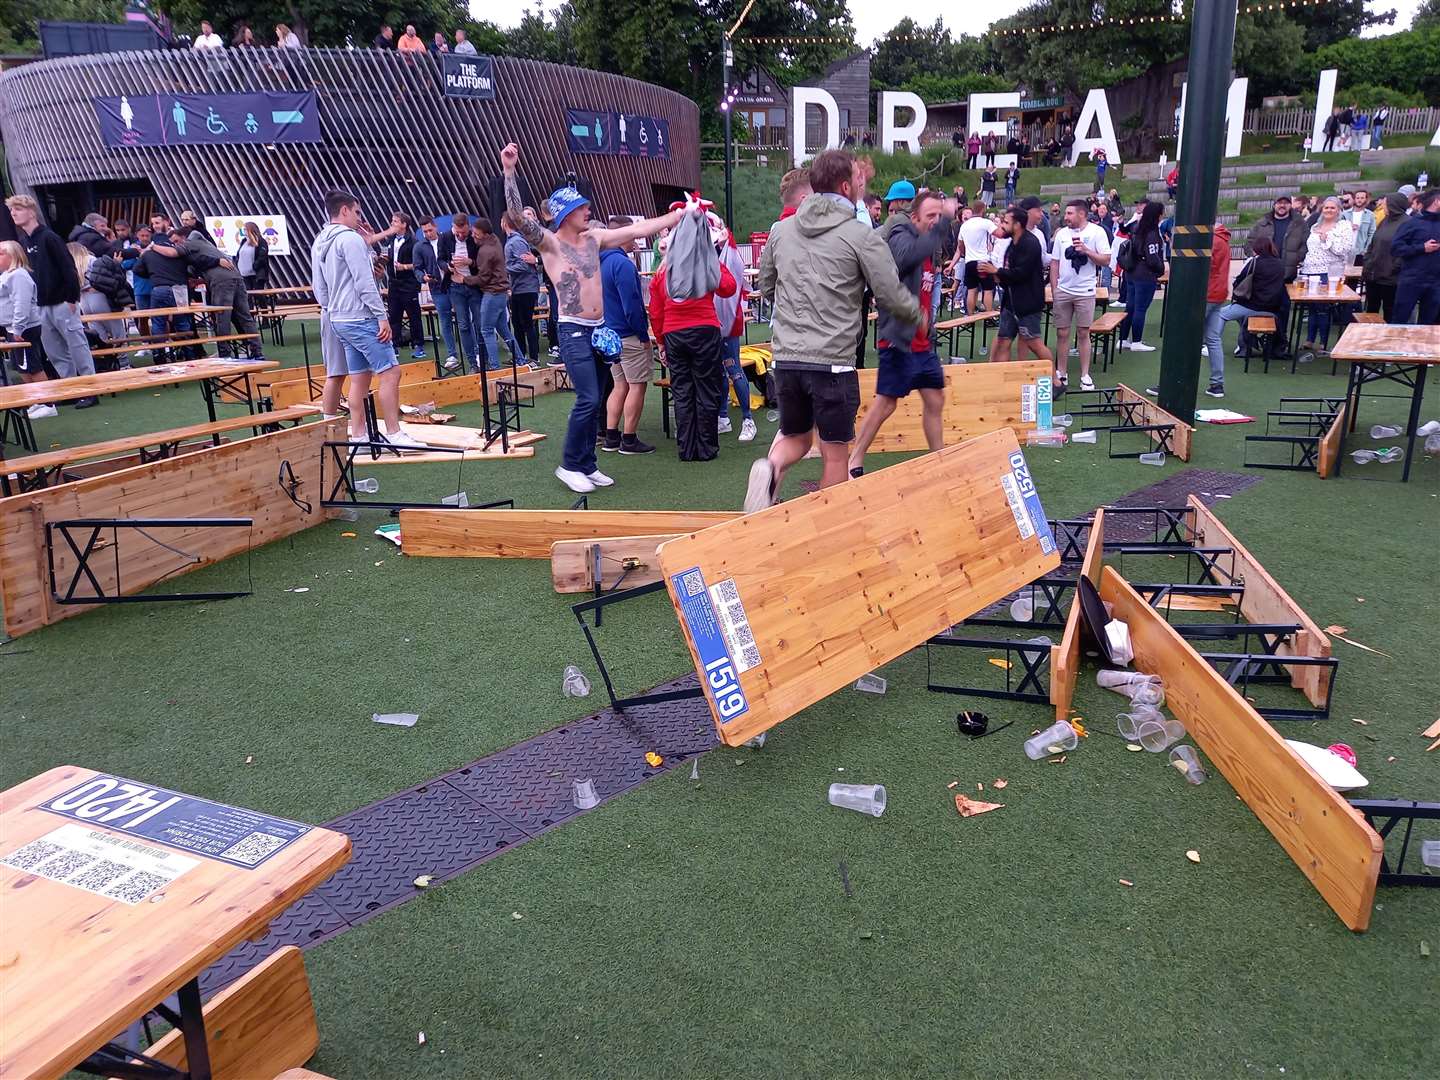 Fans overturned tables at the end of the England vs. Germany match